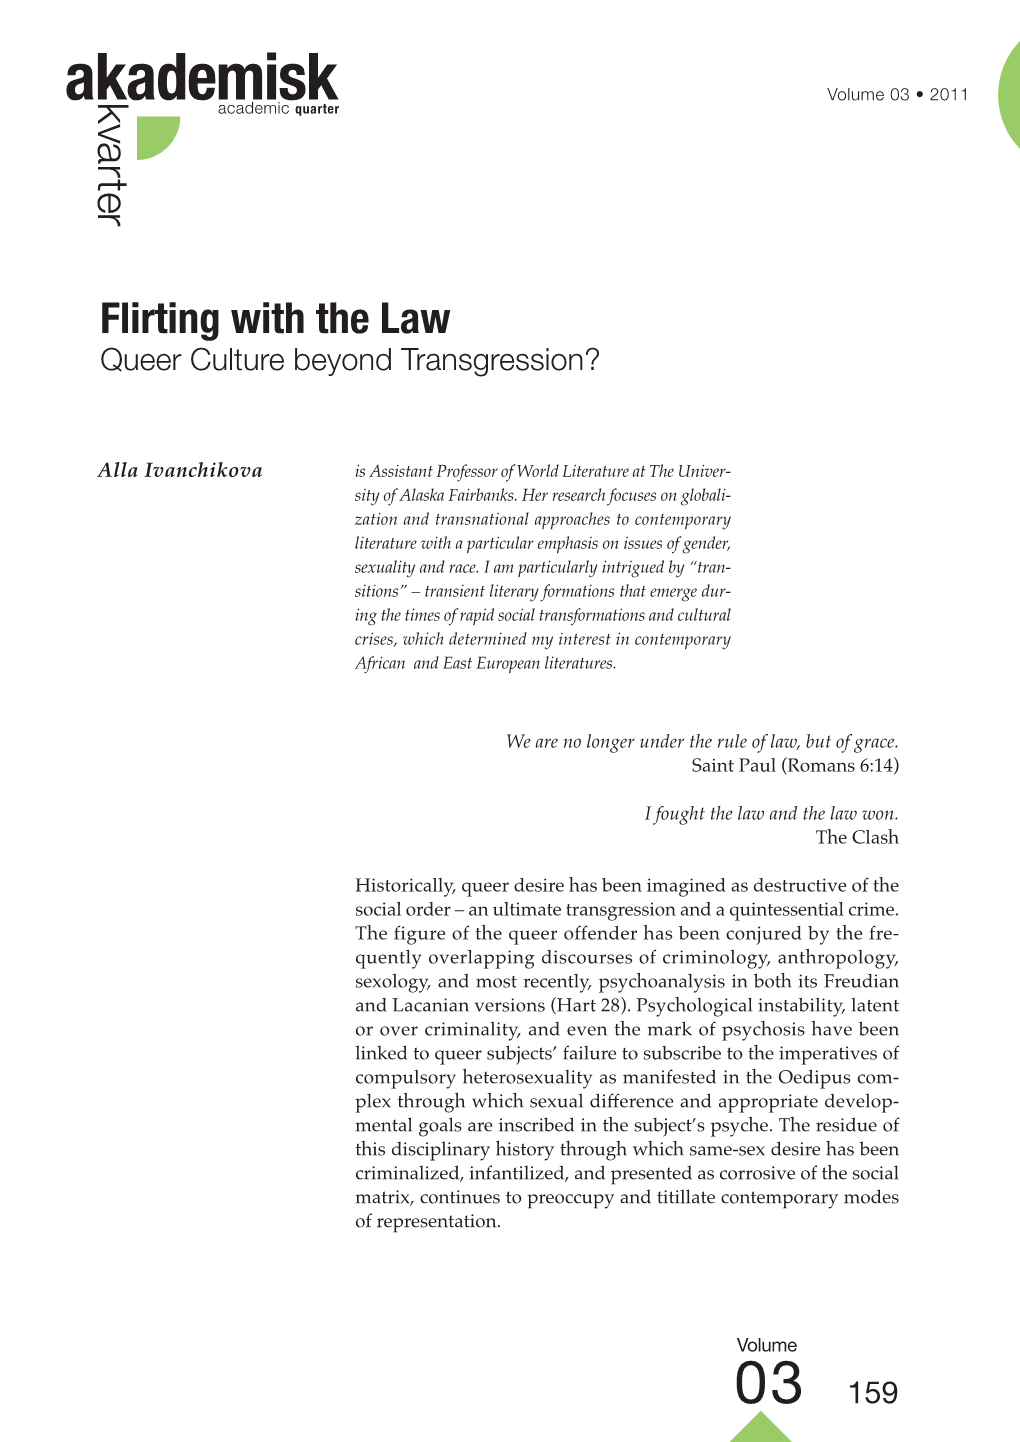 Flirting with the Law Queer Culture Beyond Transgression?